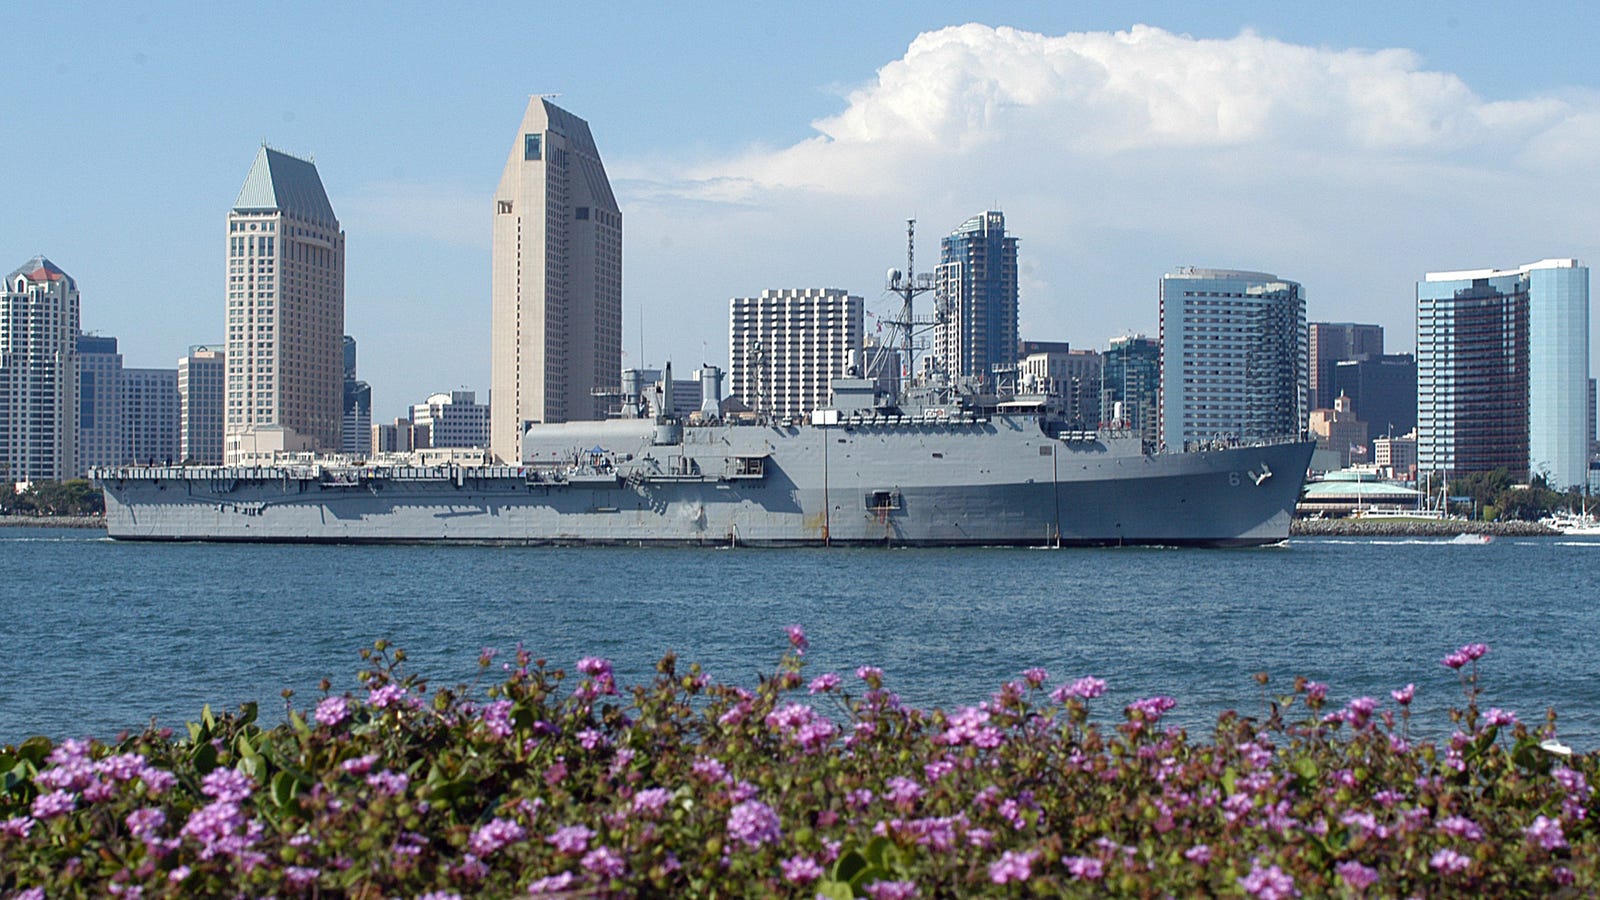 United States Navy Announces Relocation from San Diego to Los Angeles